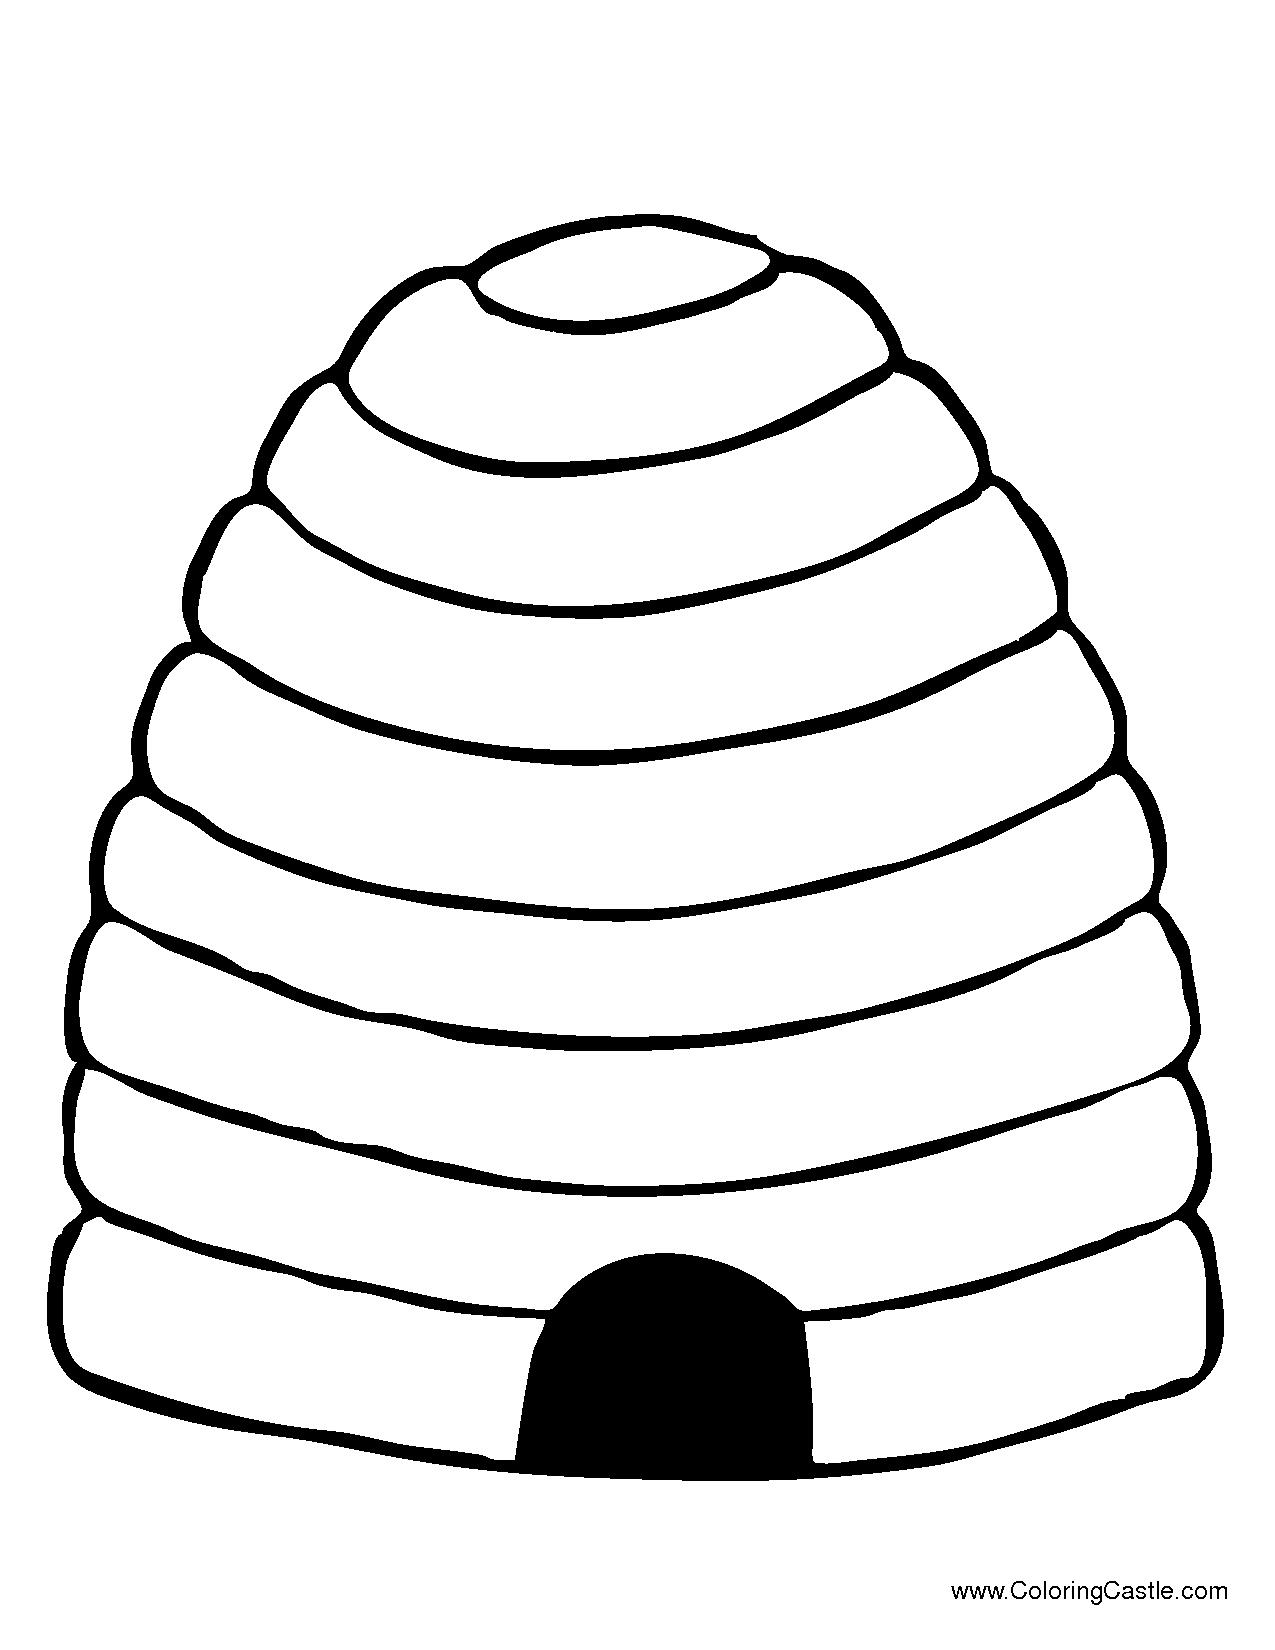 Beehive Coloring Page at Free printable colorings